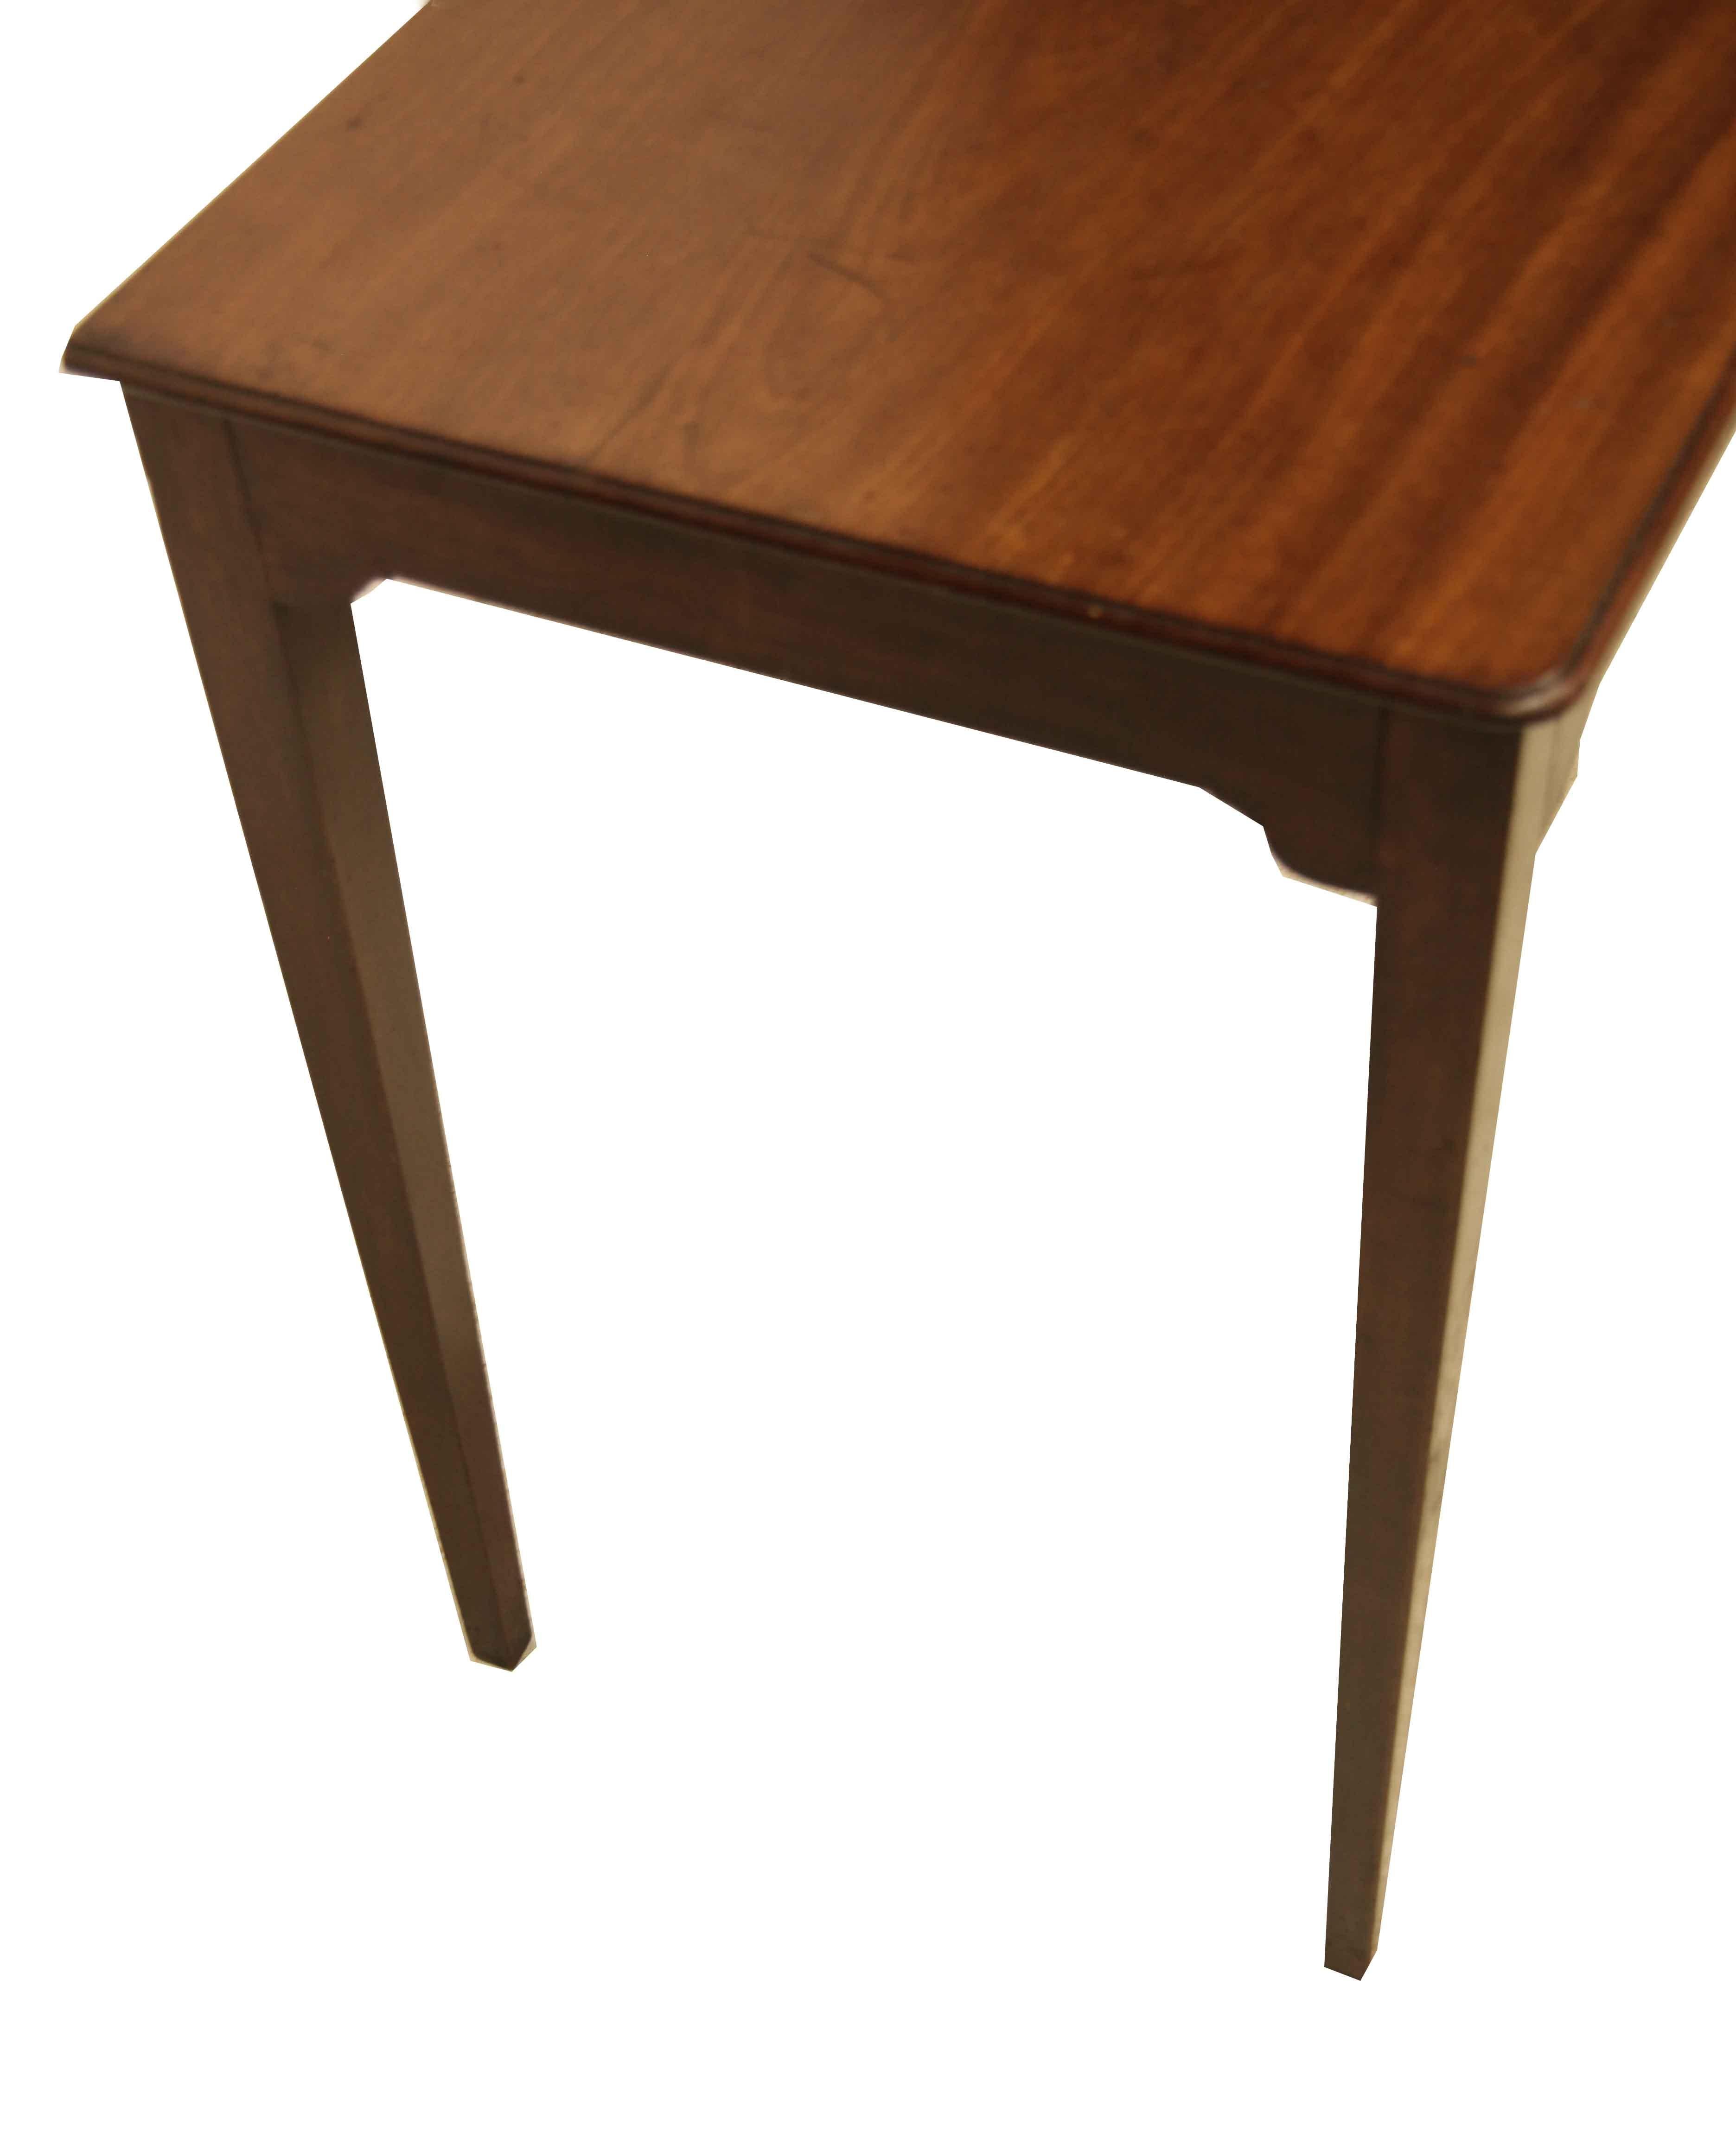 English Hepplewhite side table, the top has a beautiful faded color and patina with molded edge and slightly rounded front corners. The four legs are delicate but sturdy and are nicely tapered. This table defines simple elegance, and there is ample